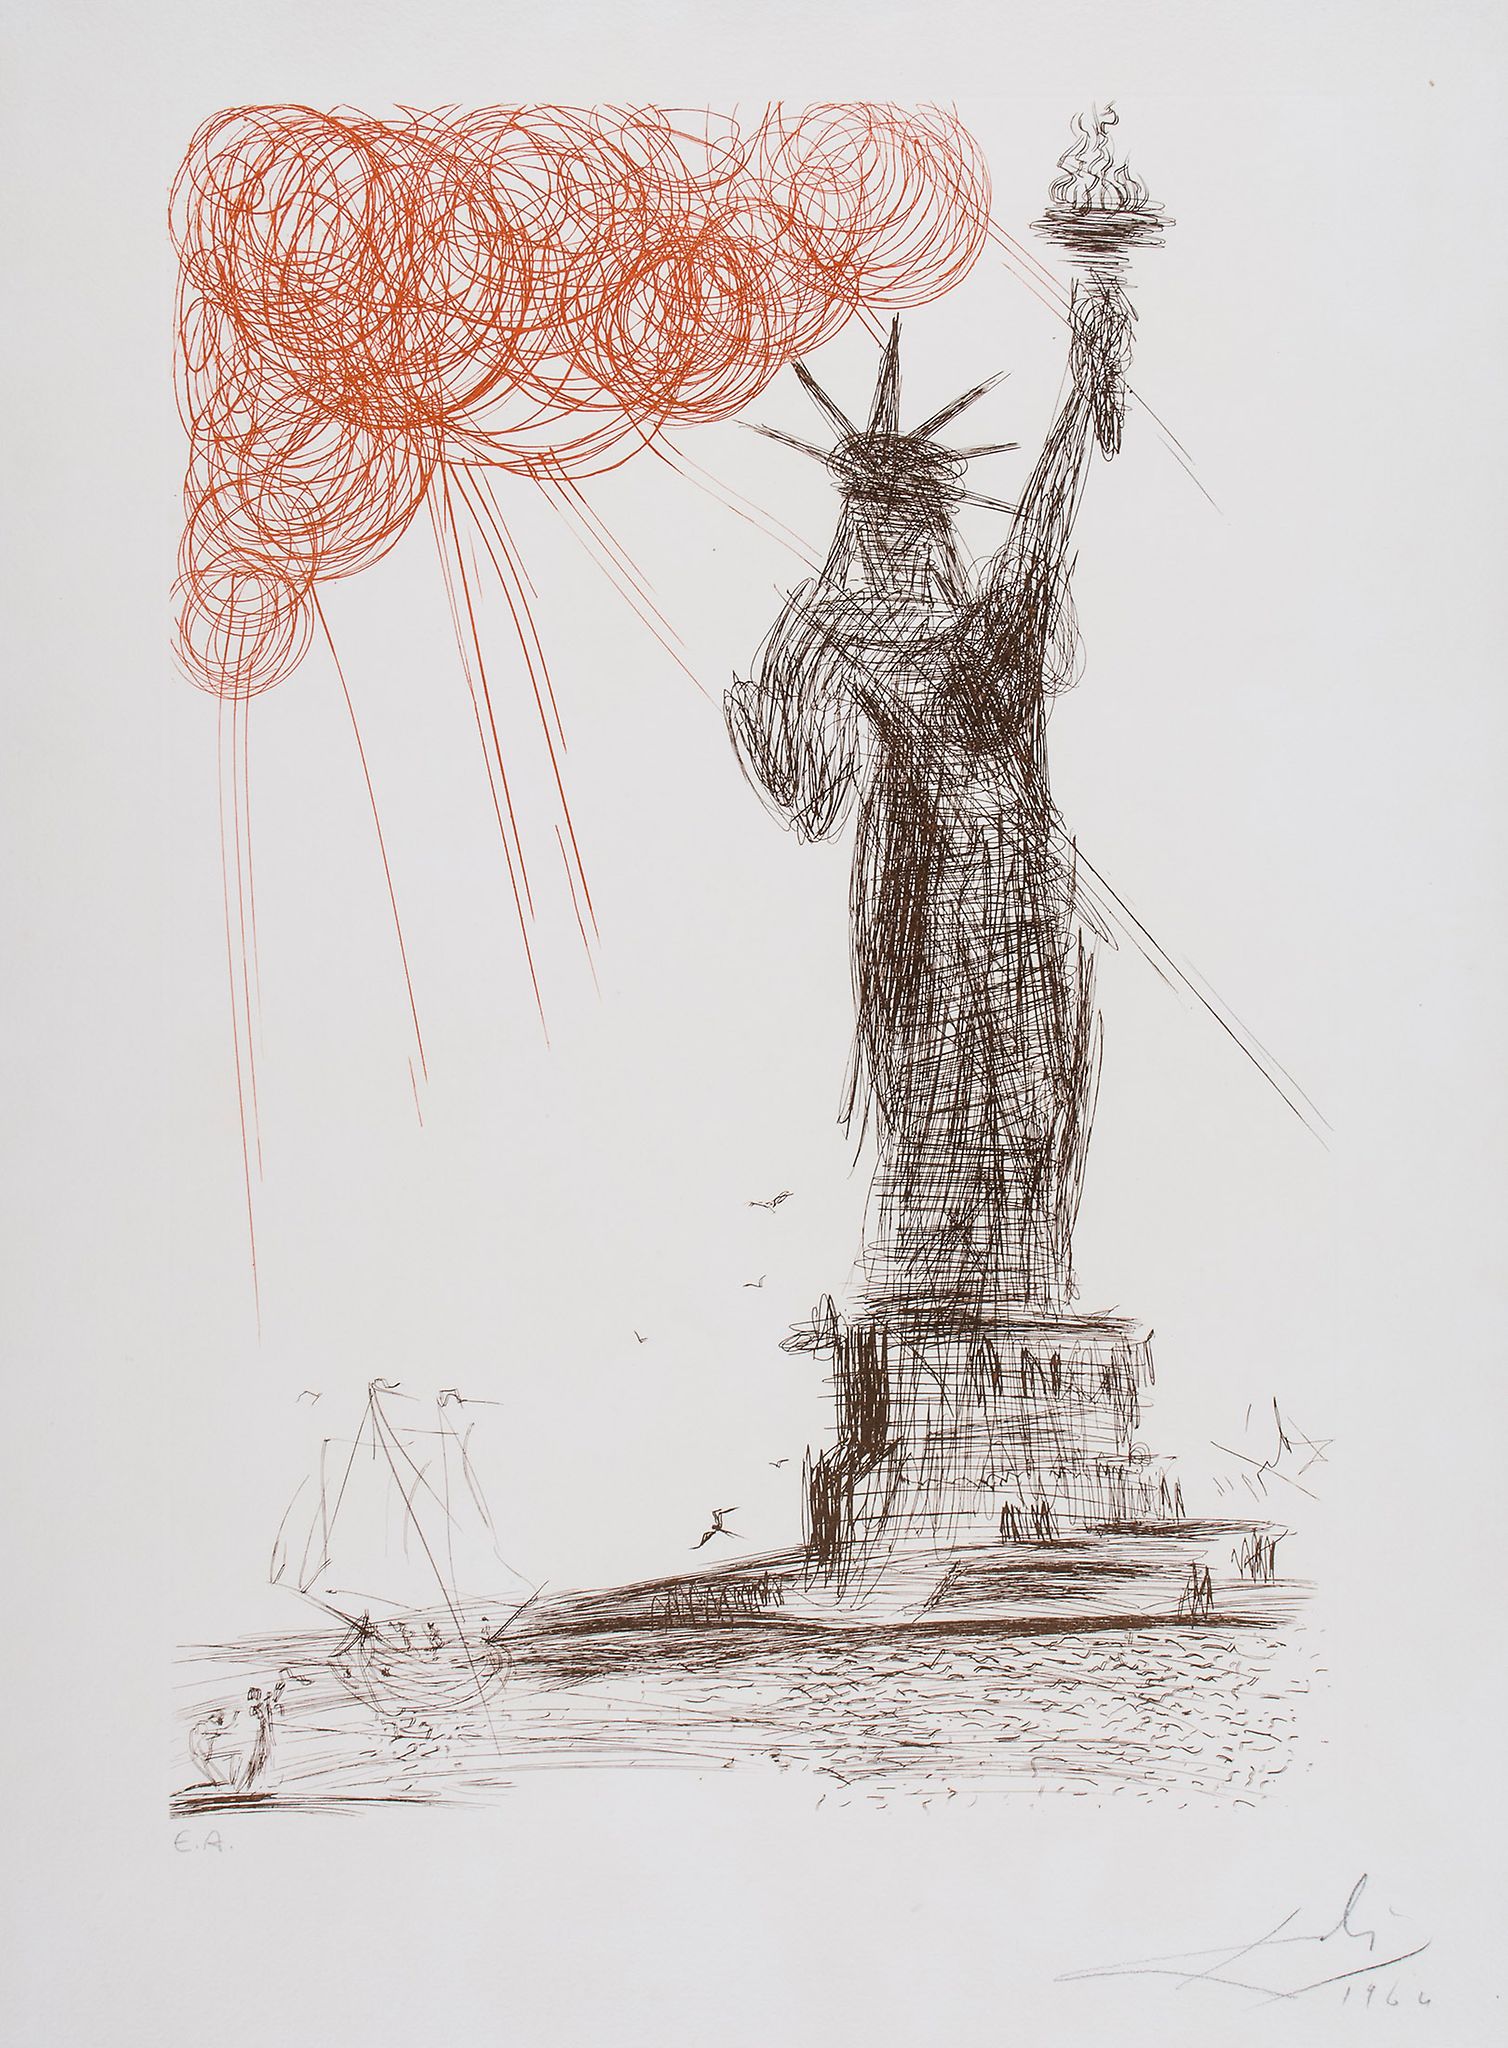 Salvador Dali (1904-1989) - Statue of Liberty (M&L.115; F.64-3d) etching printed in colours, 1964,